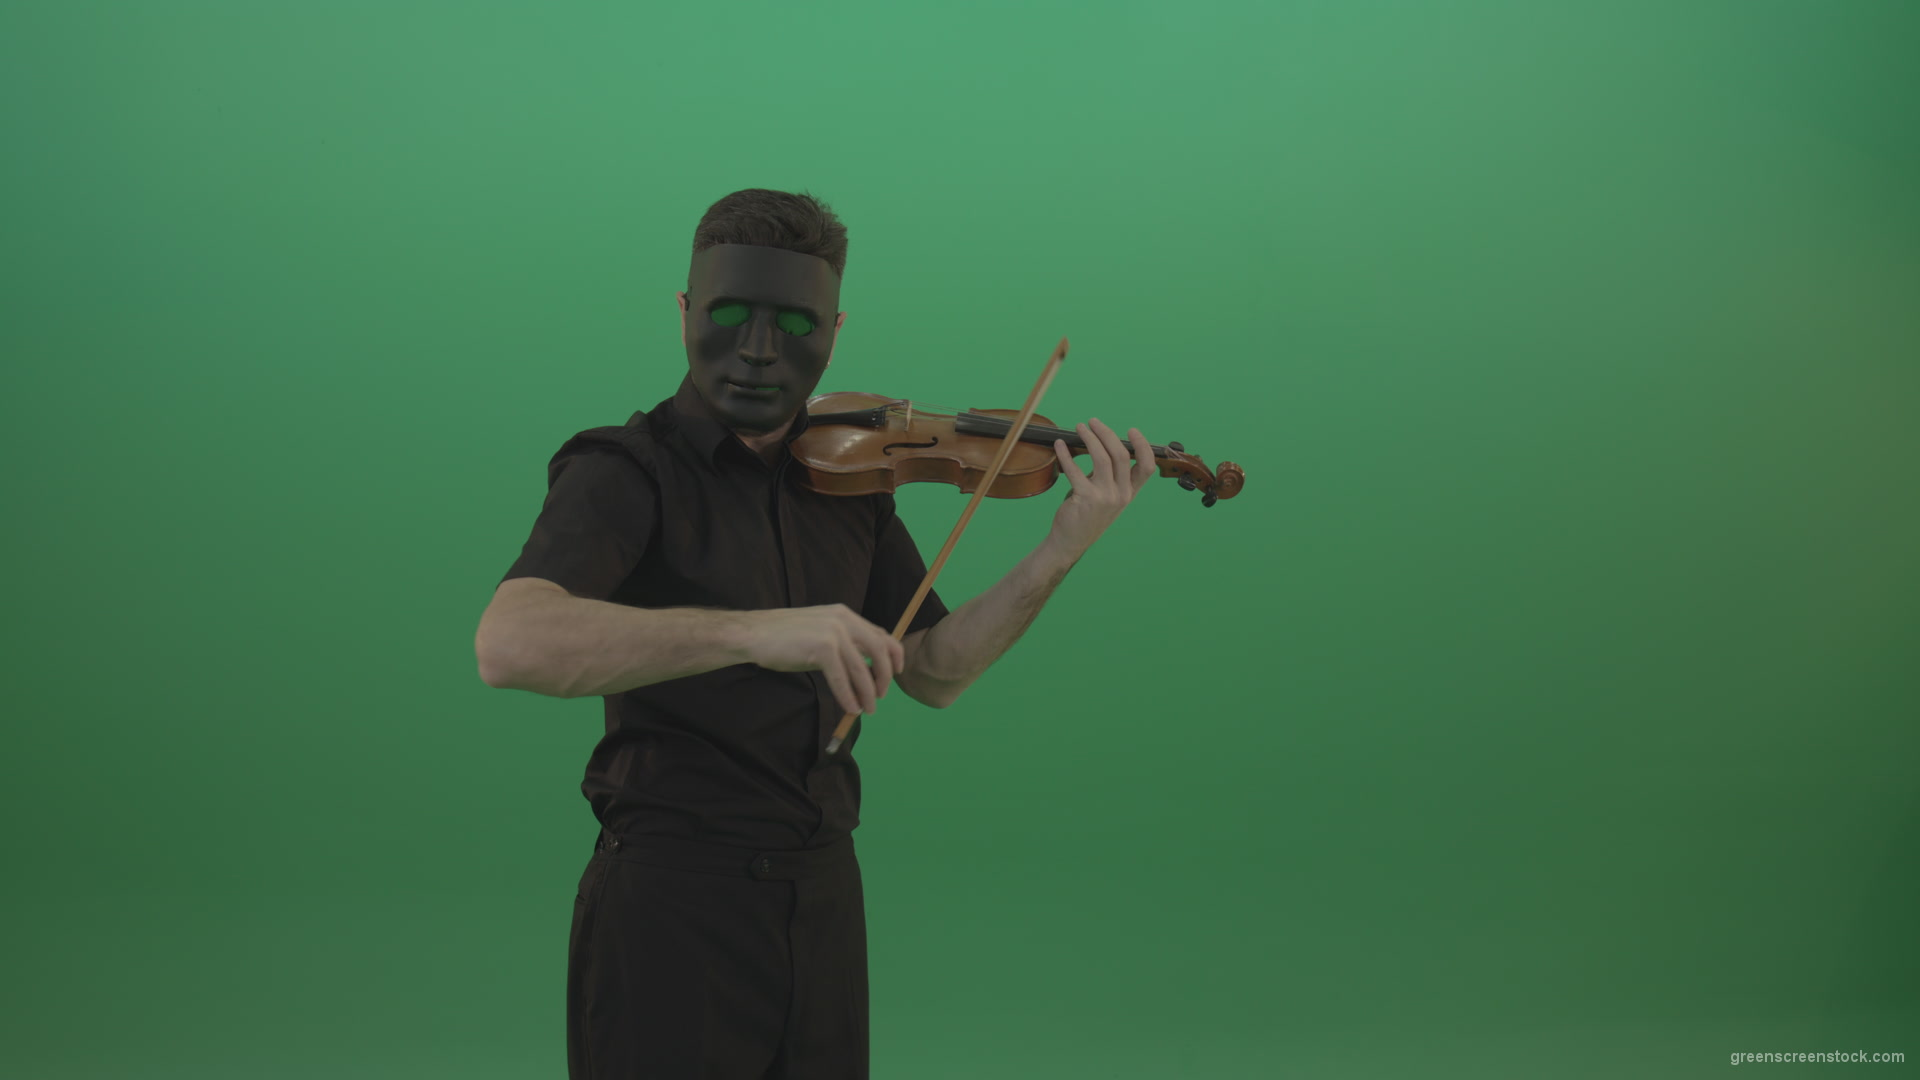 Man-in-black-wear-and-mask-play-violin-fiddle-strings-gothic-dark-music-isolated-on-green-screen_002 Green Screen Stock